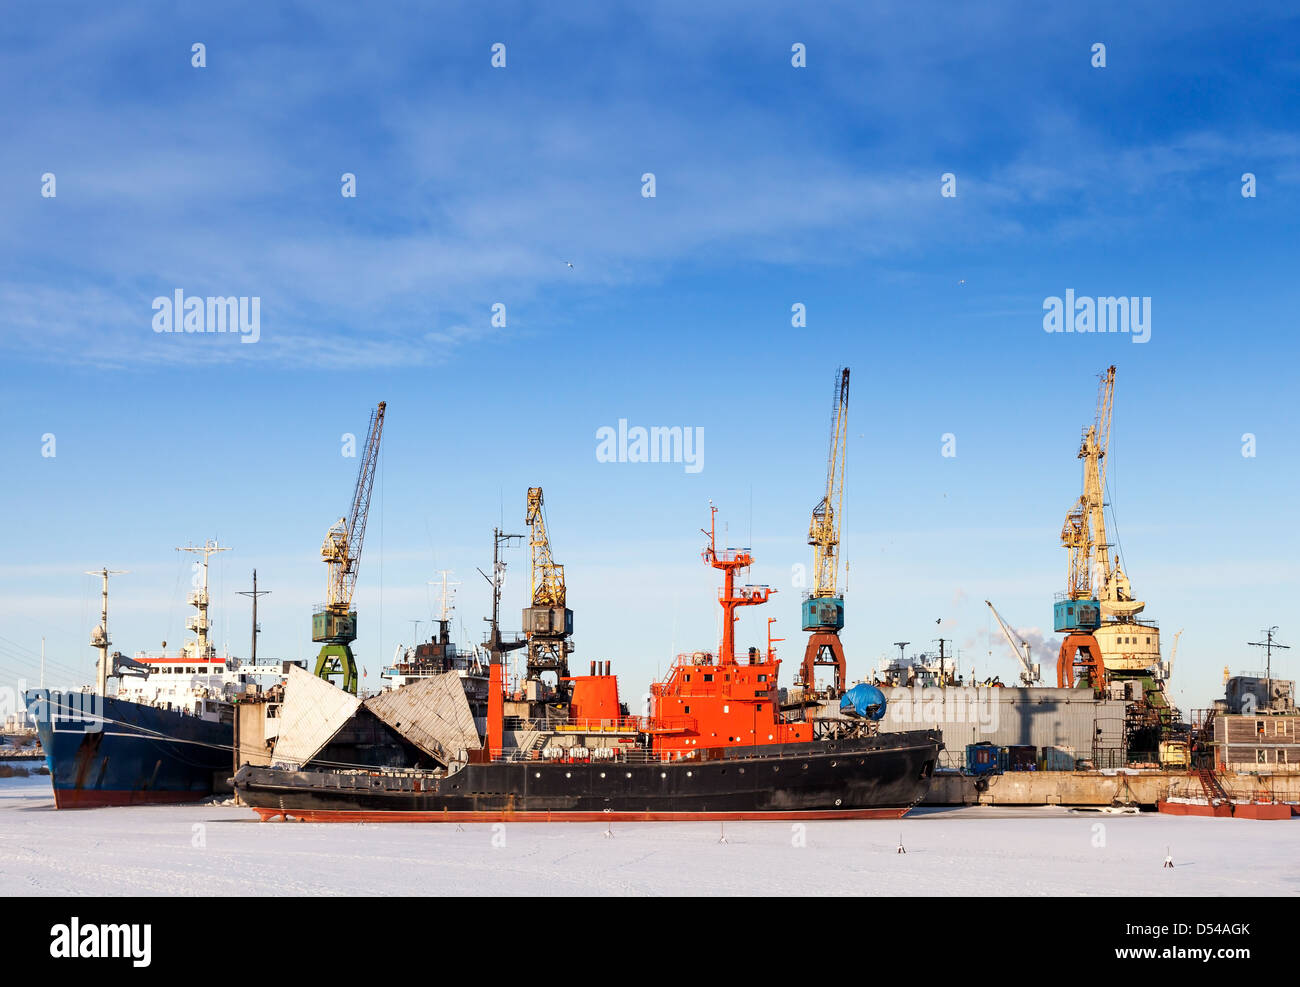 Ships and cranes in wharf of St.Petersburg, Russia Stock Photo